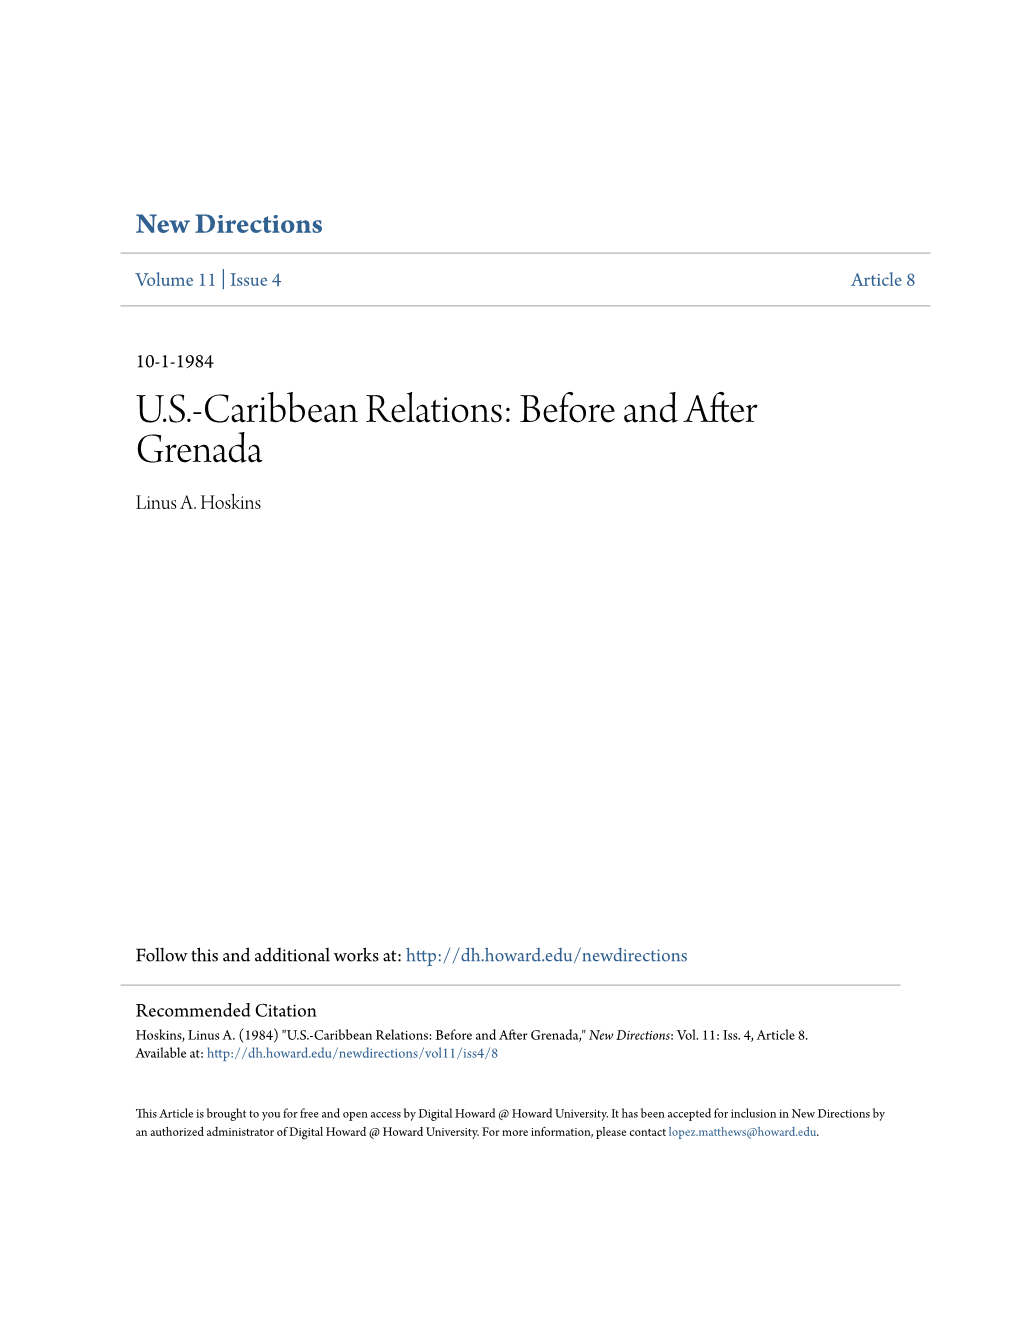 U.S.-Caribbean Relations: Before and After Grenada Linus A